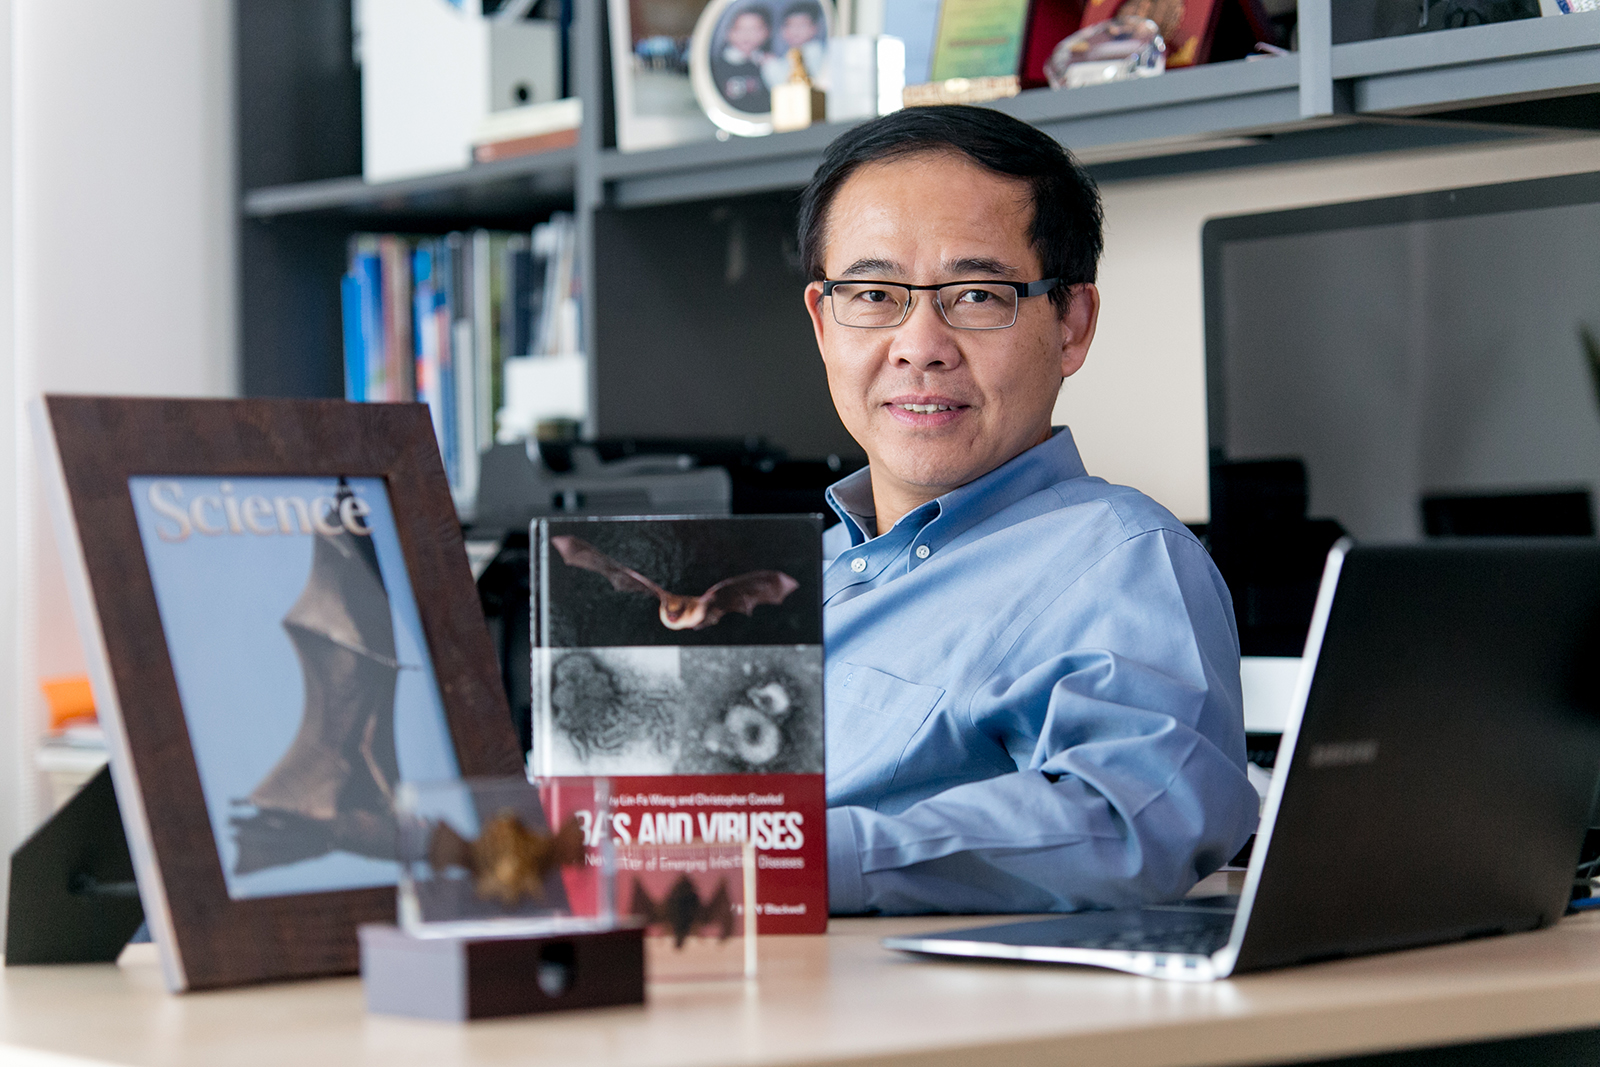 Wang Linfa is one of the world’s leading experts on bat biology